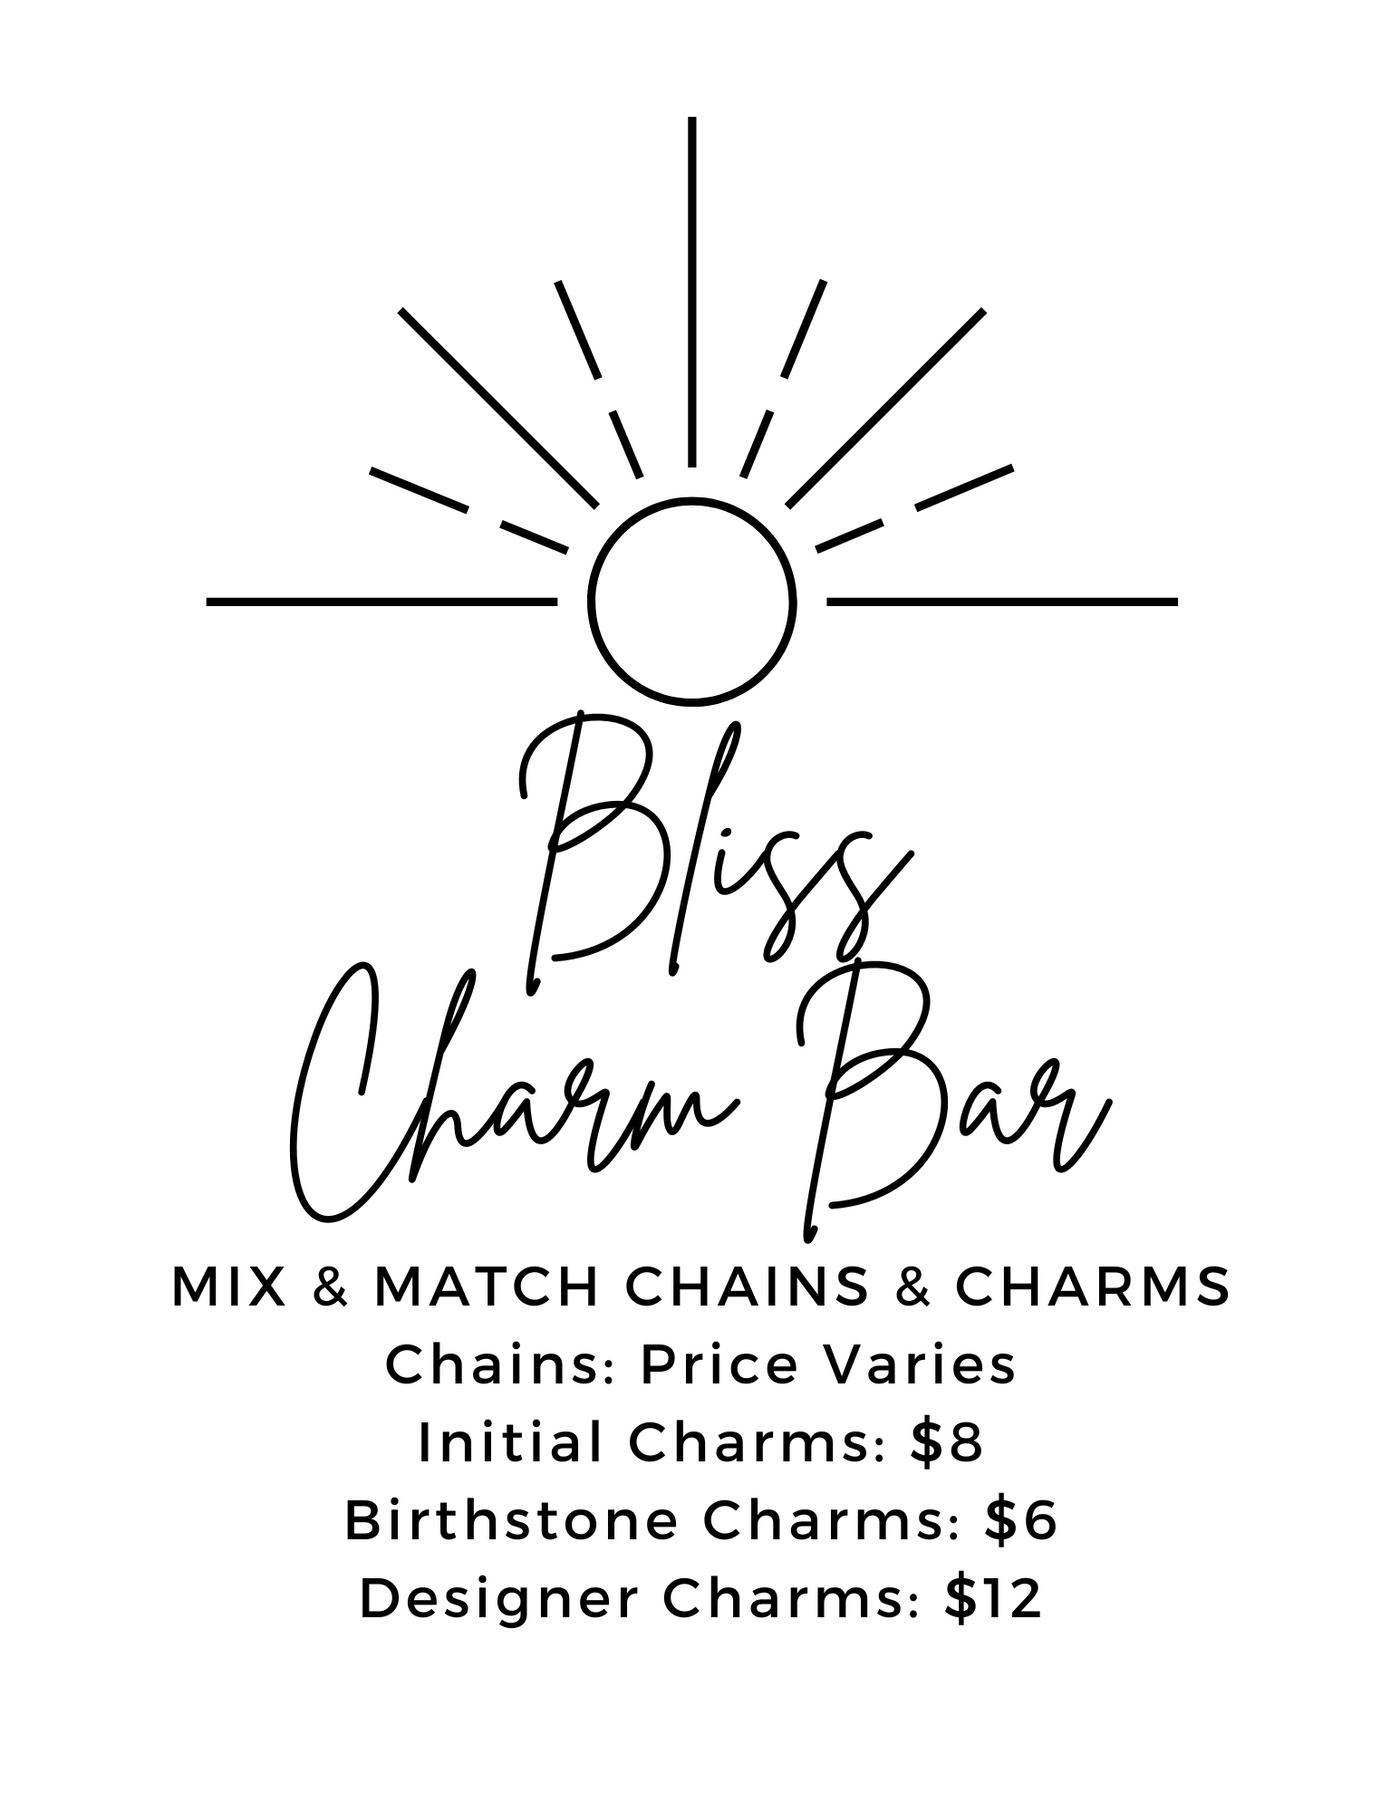 Necklace Charm Bar-Brittany Carl-Shop Anchored Bliss Women's Boutique Clothing Store